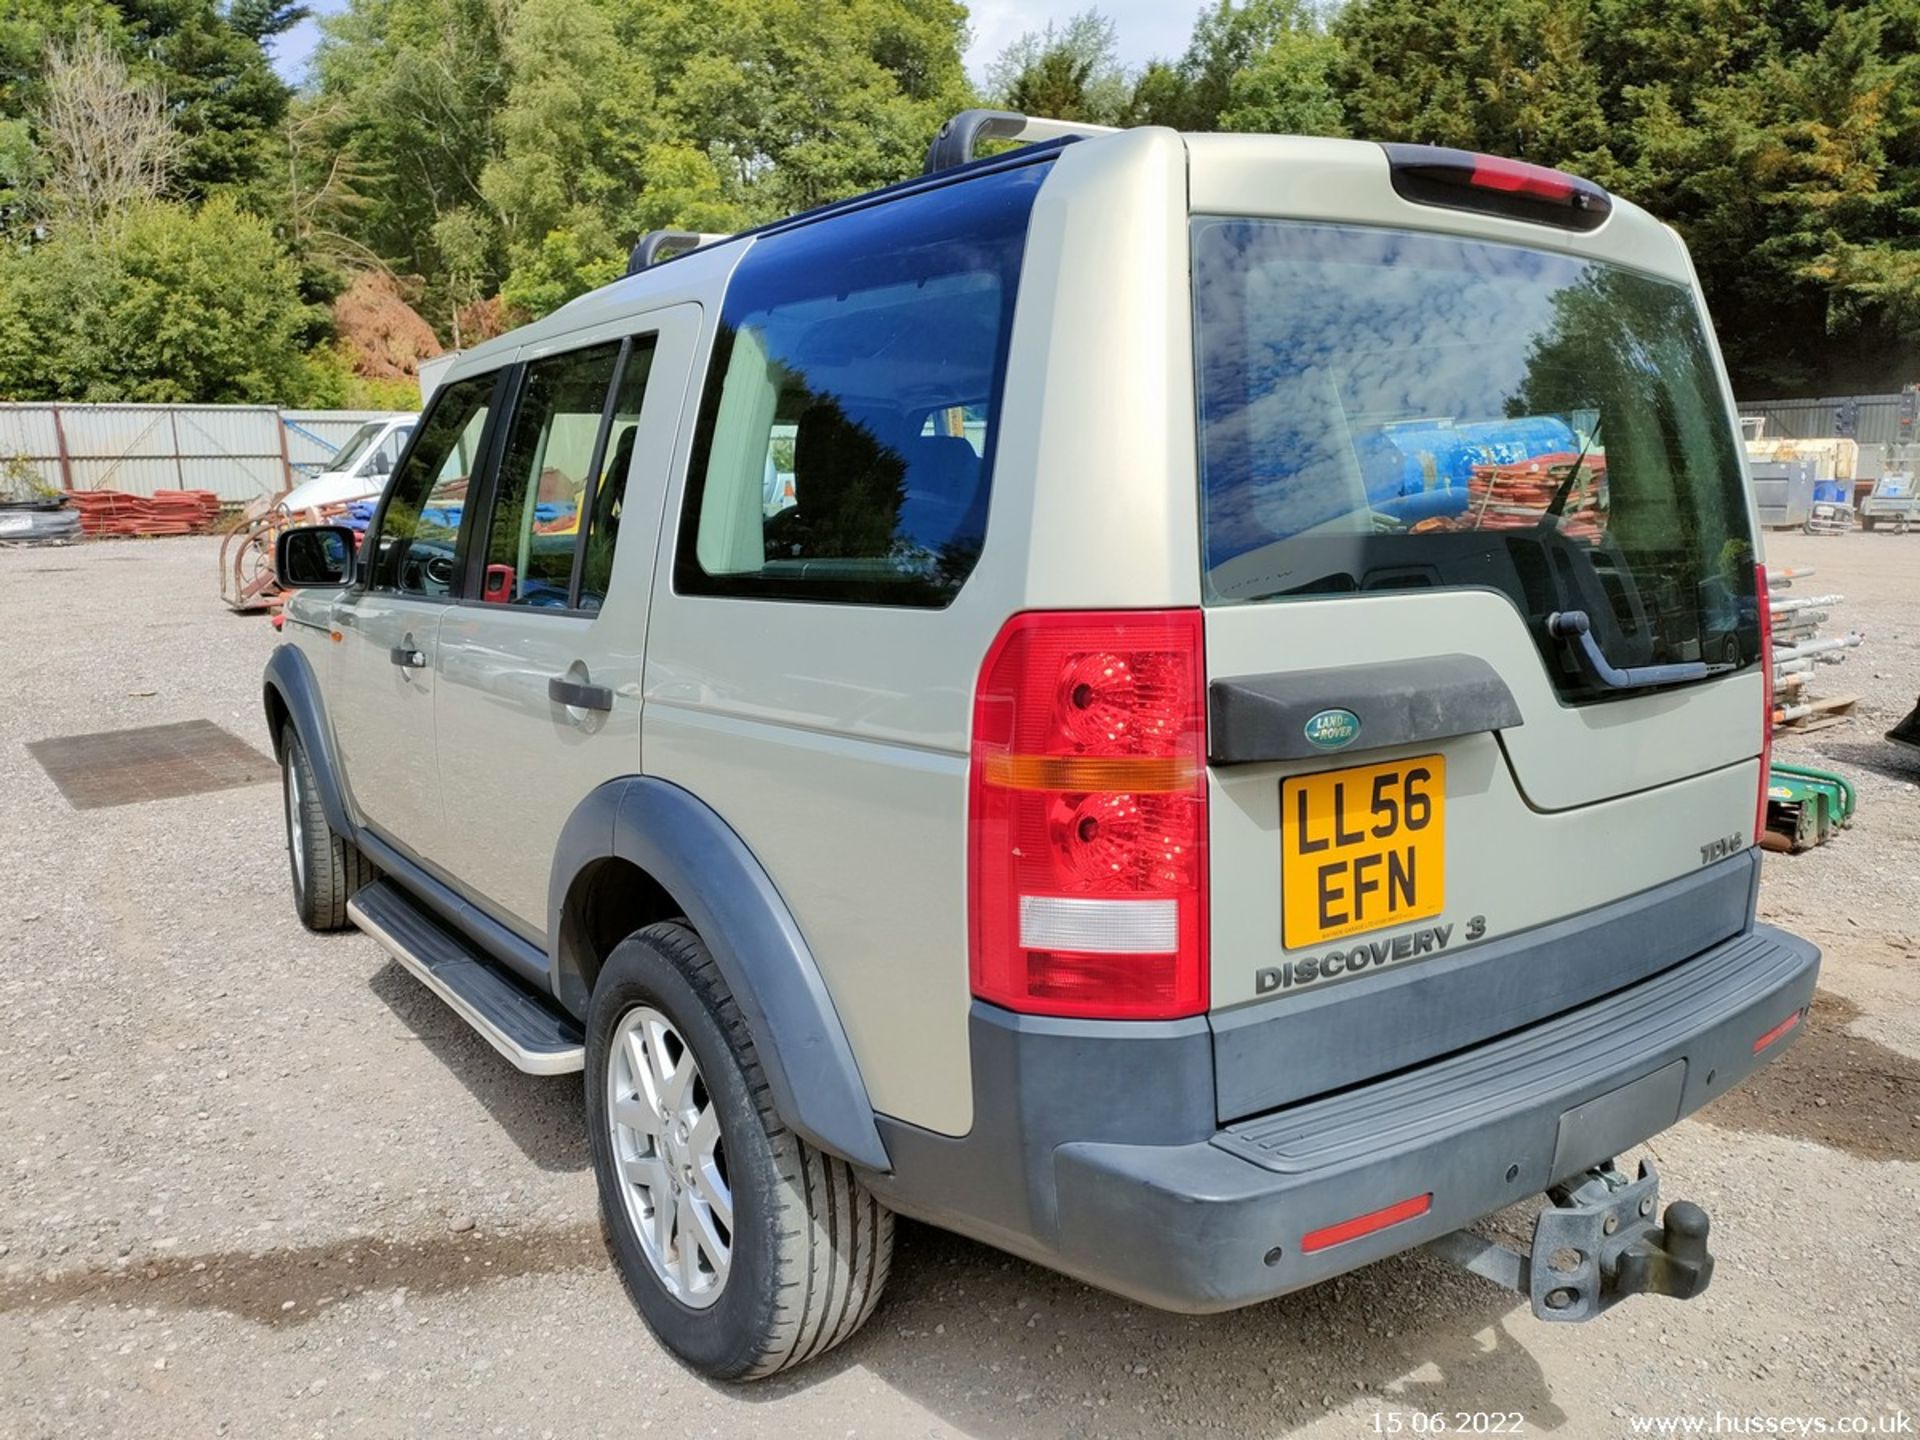 2007 LAND ROVER DISCOVERY - 2720cc 5dr Estate (Gold) - Image 11 of 25